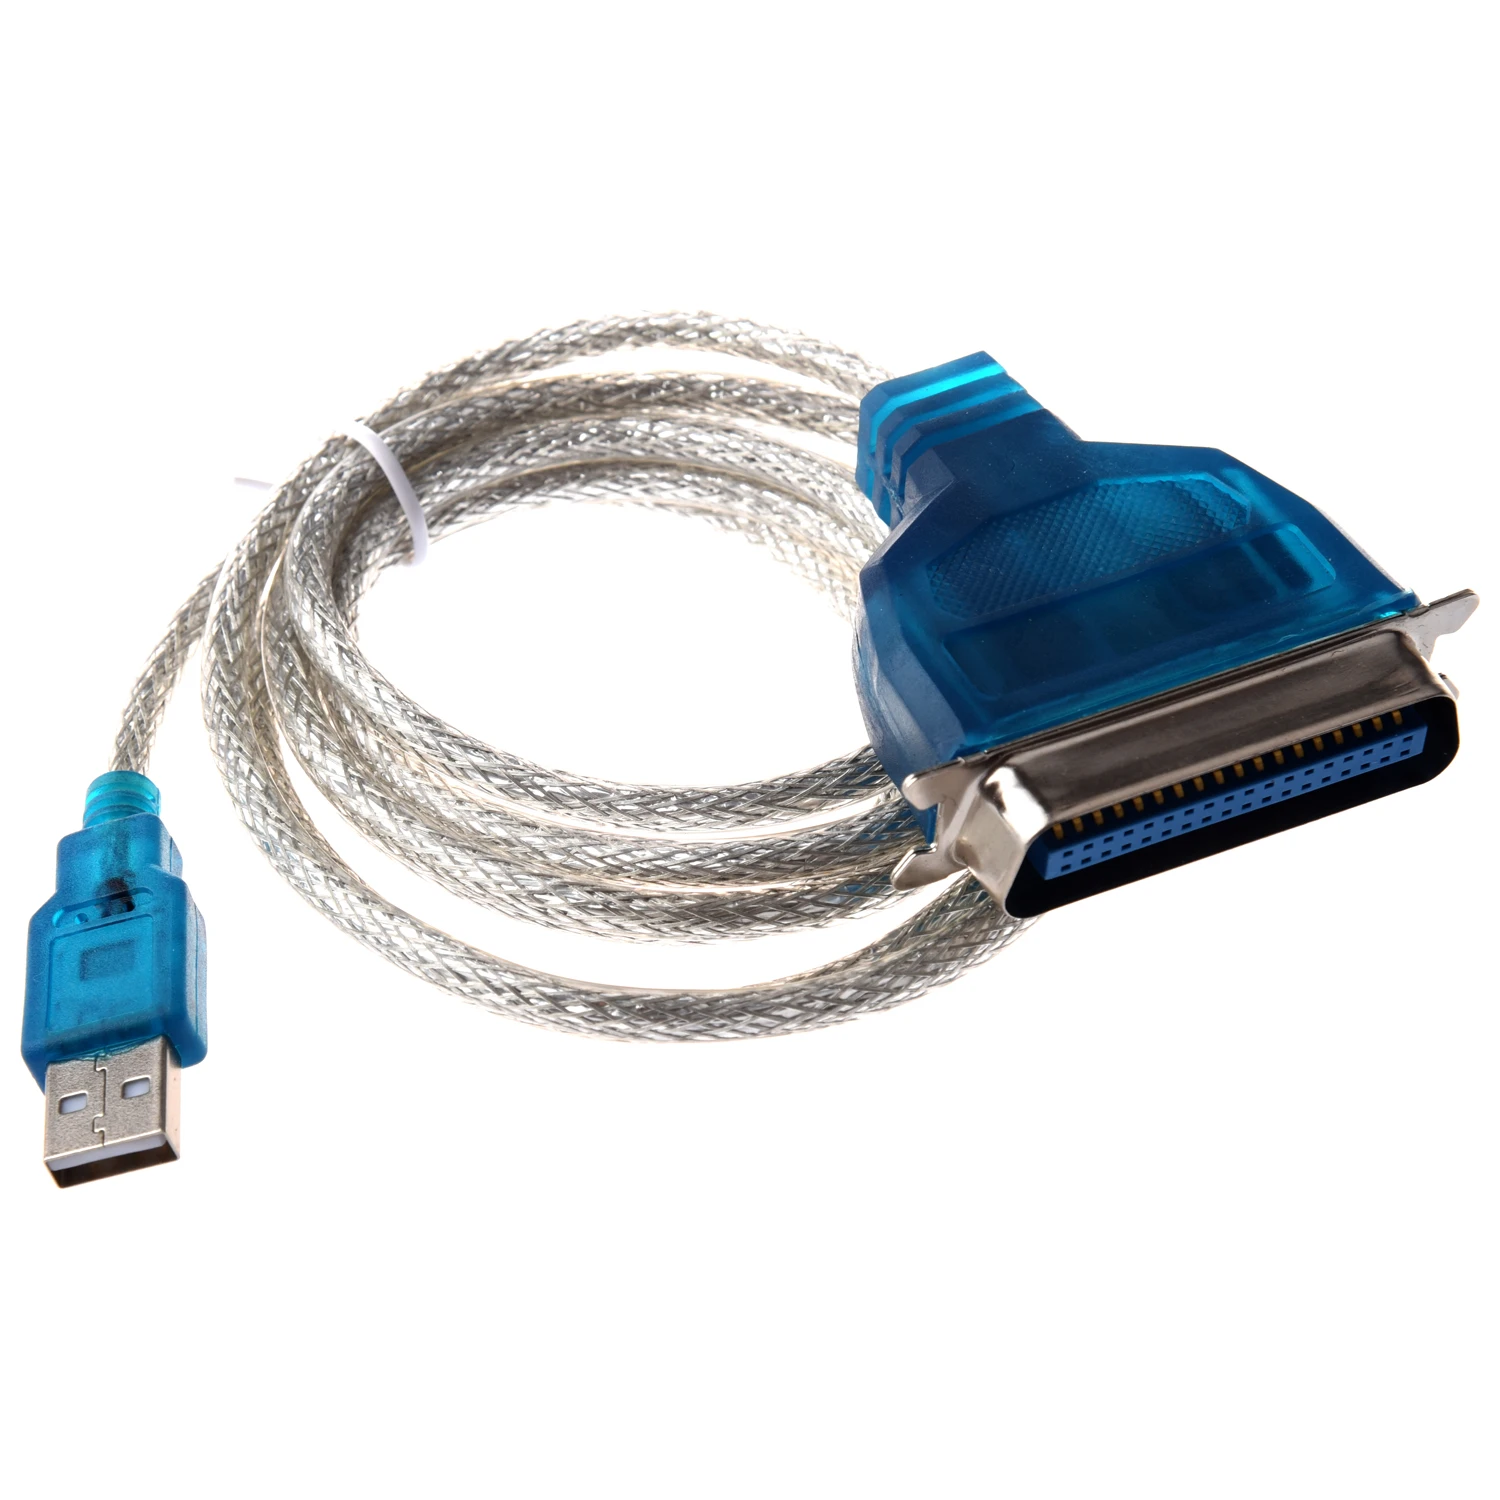 To Parallel Ieee 1284 Printer Adapter Cable Pc (connect Your Old Parallel Printer To A Usb Port) - Pc Hardware Cables & Adapters - AliExpress